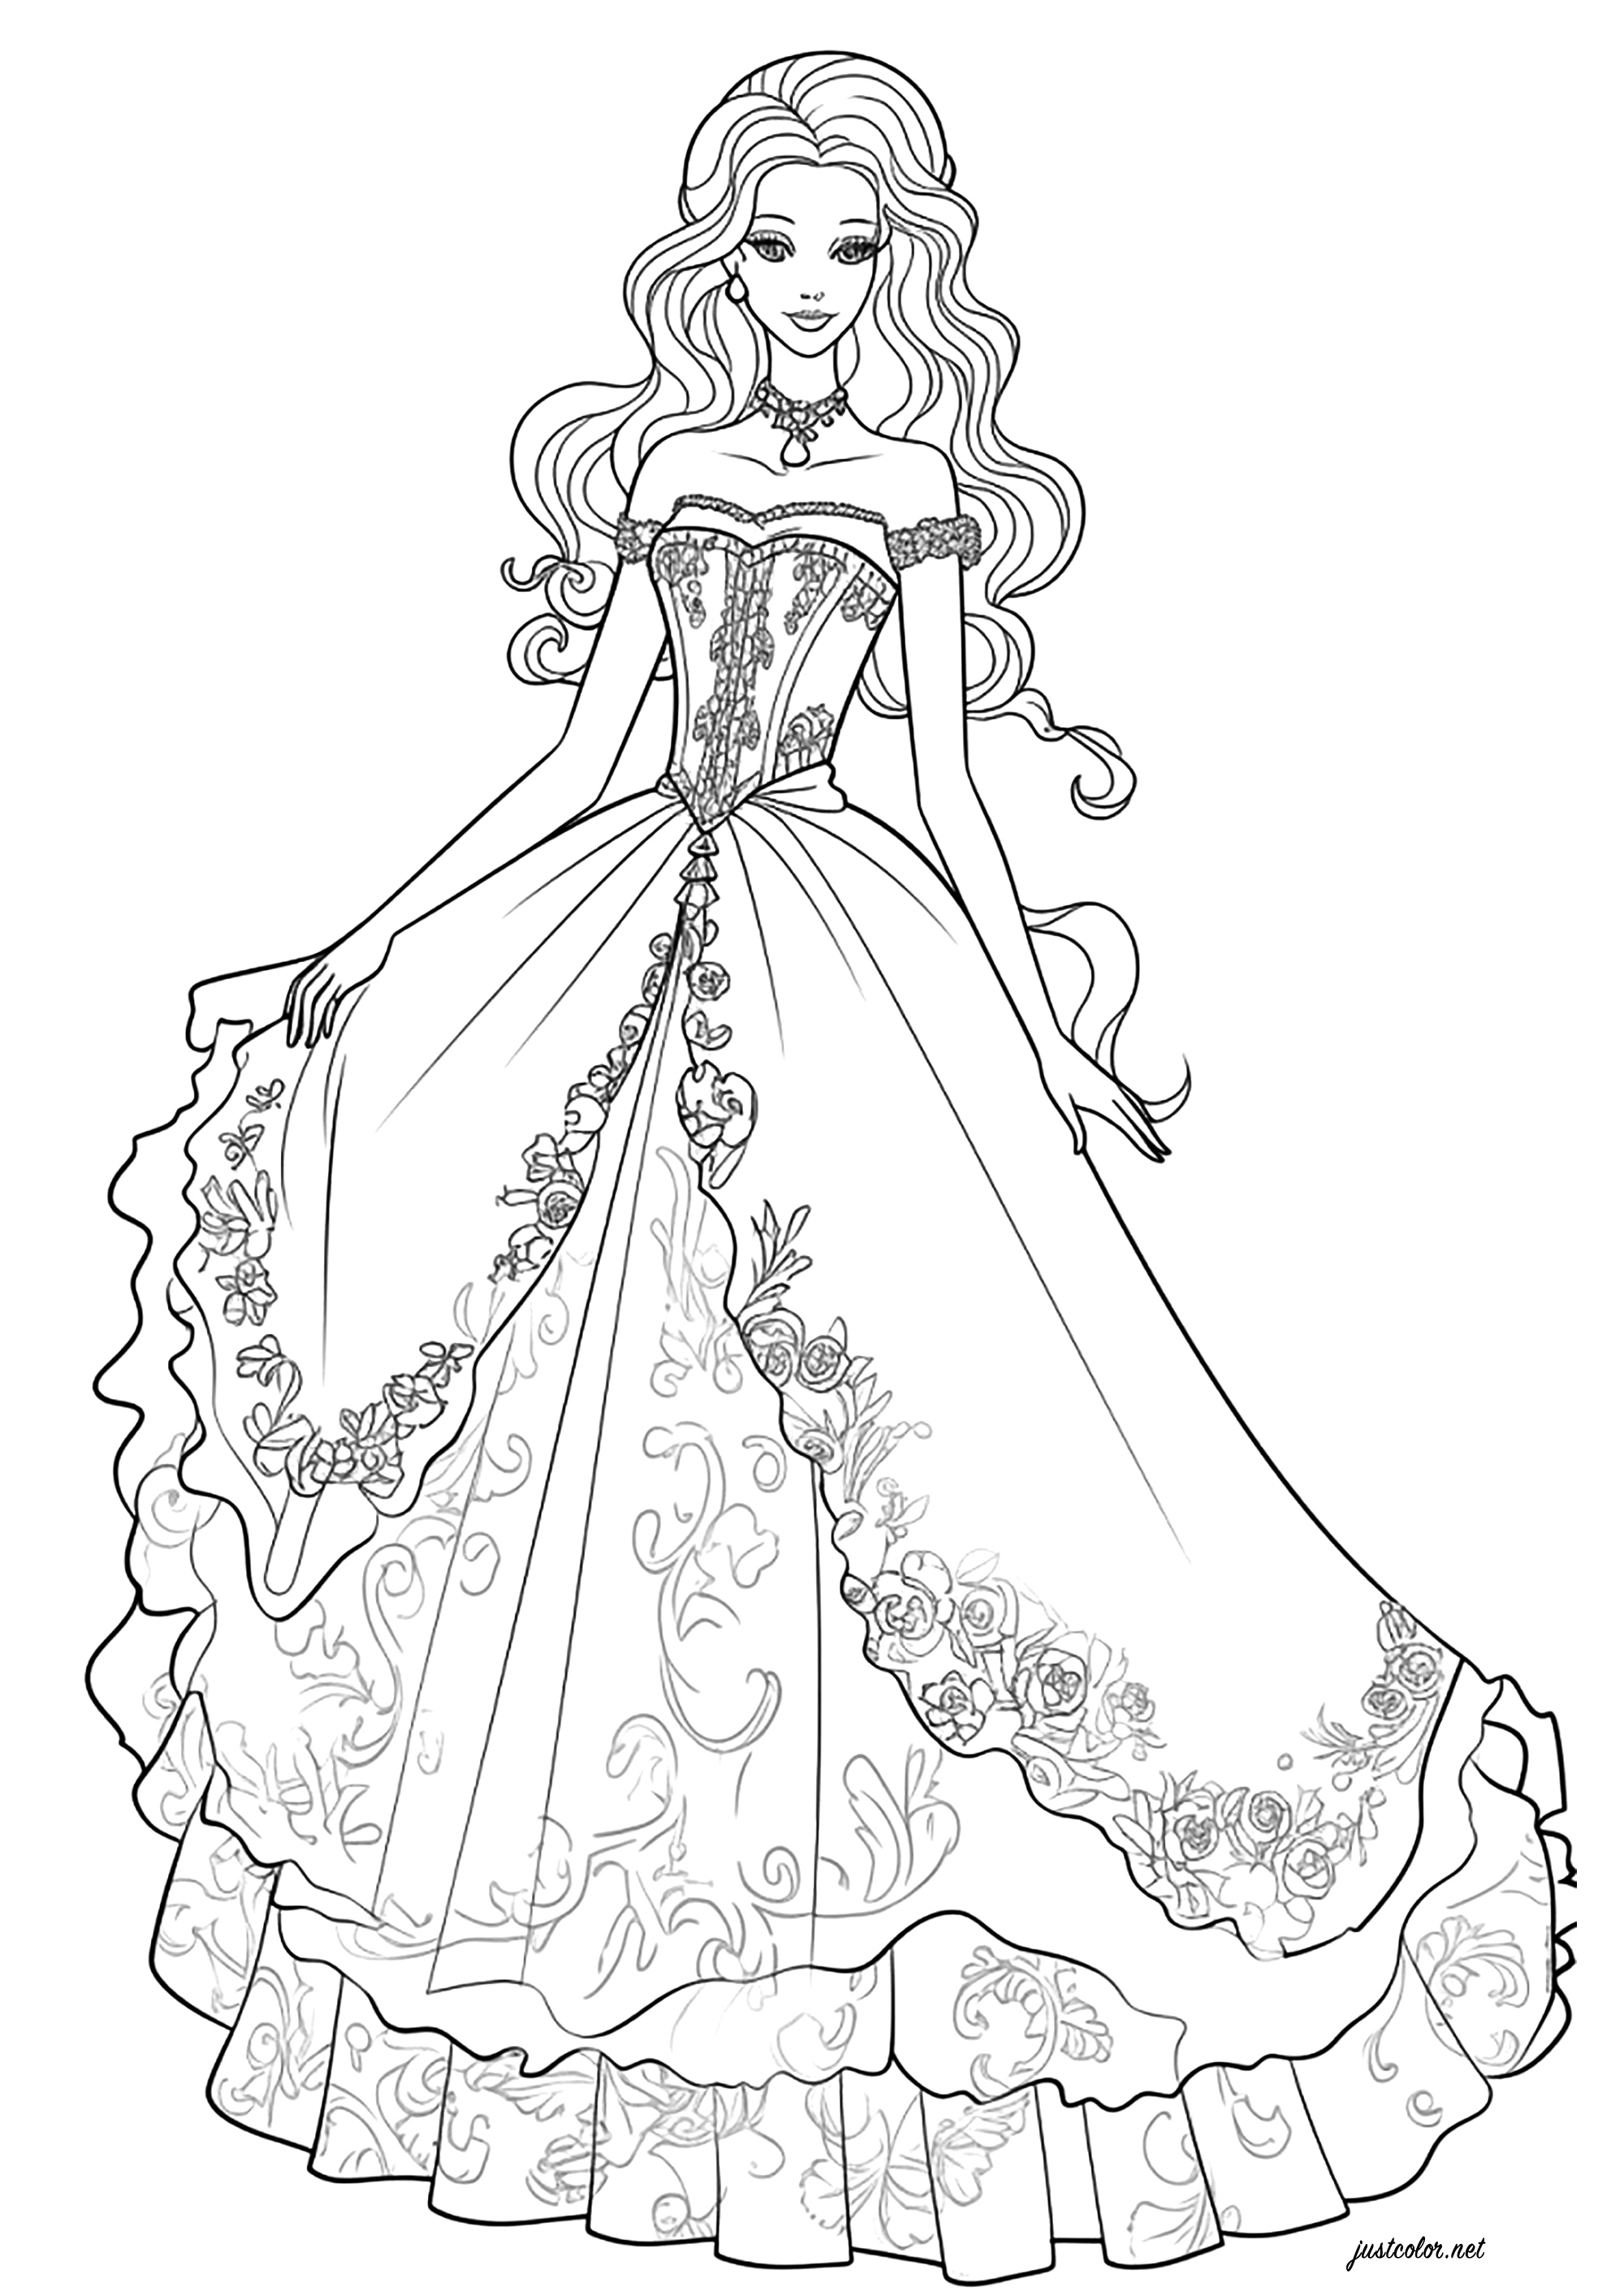 Barbie in a pretty princess dress. Color the pretty details of this Barbie-inspired female character's dress.